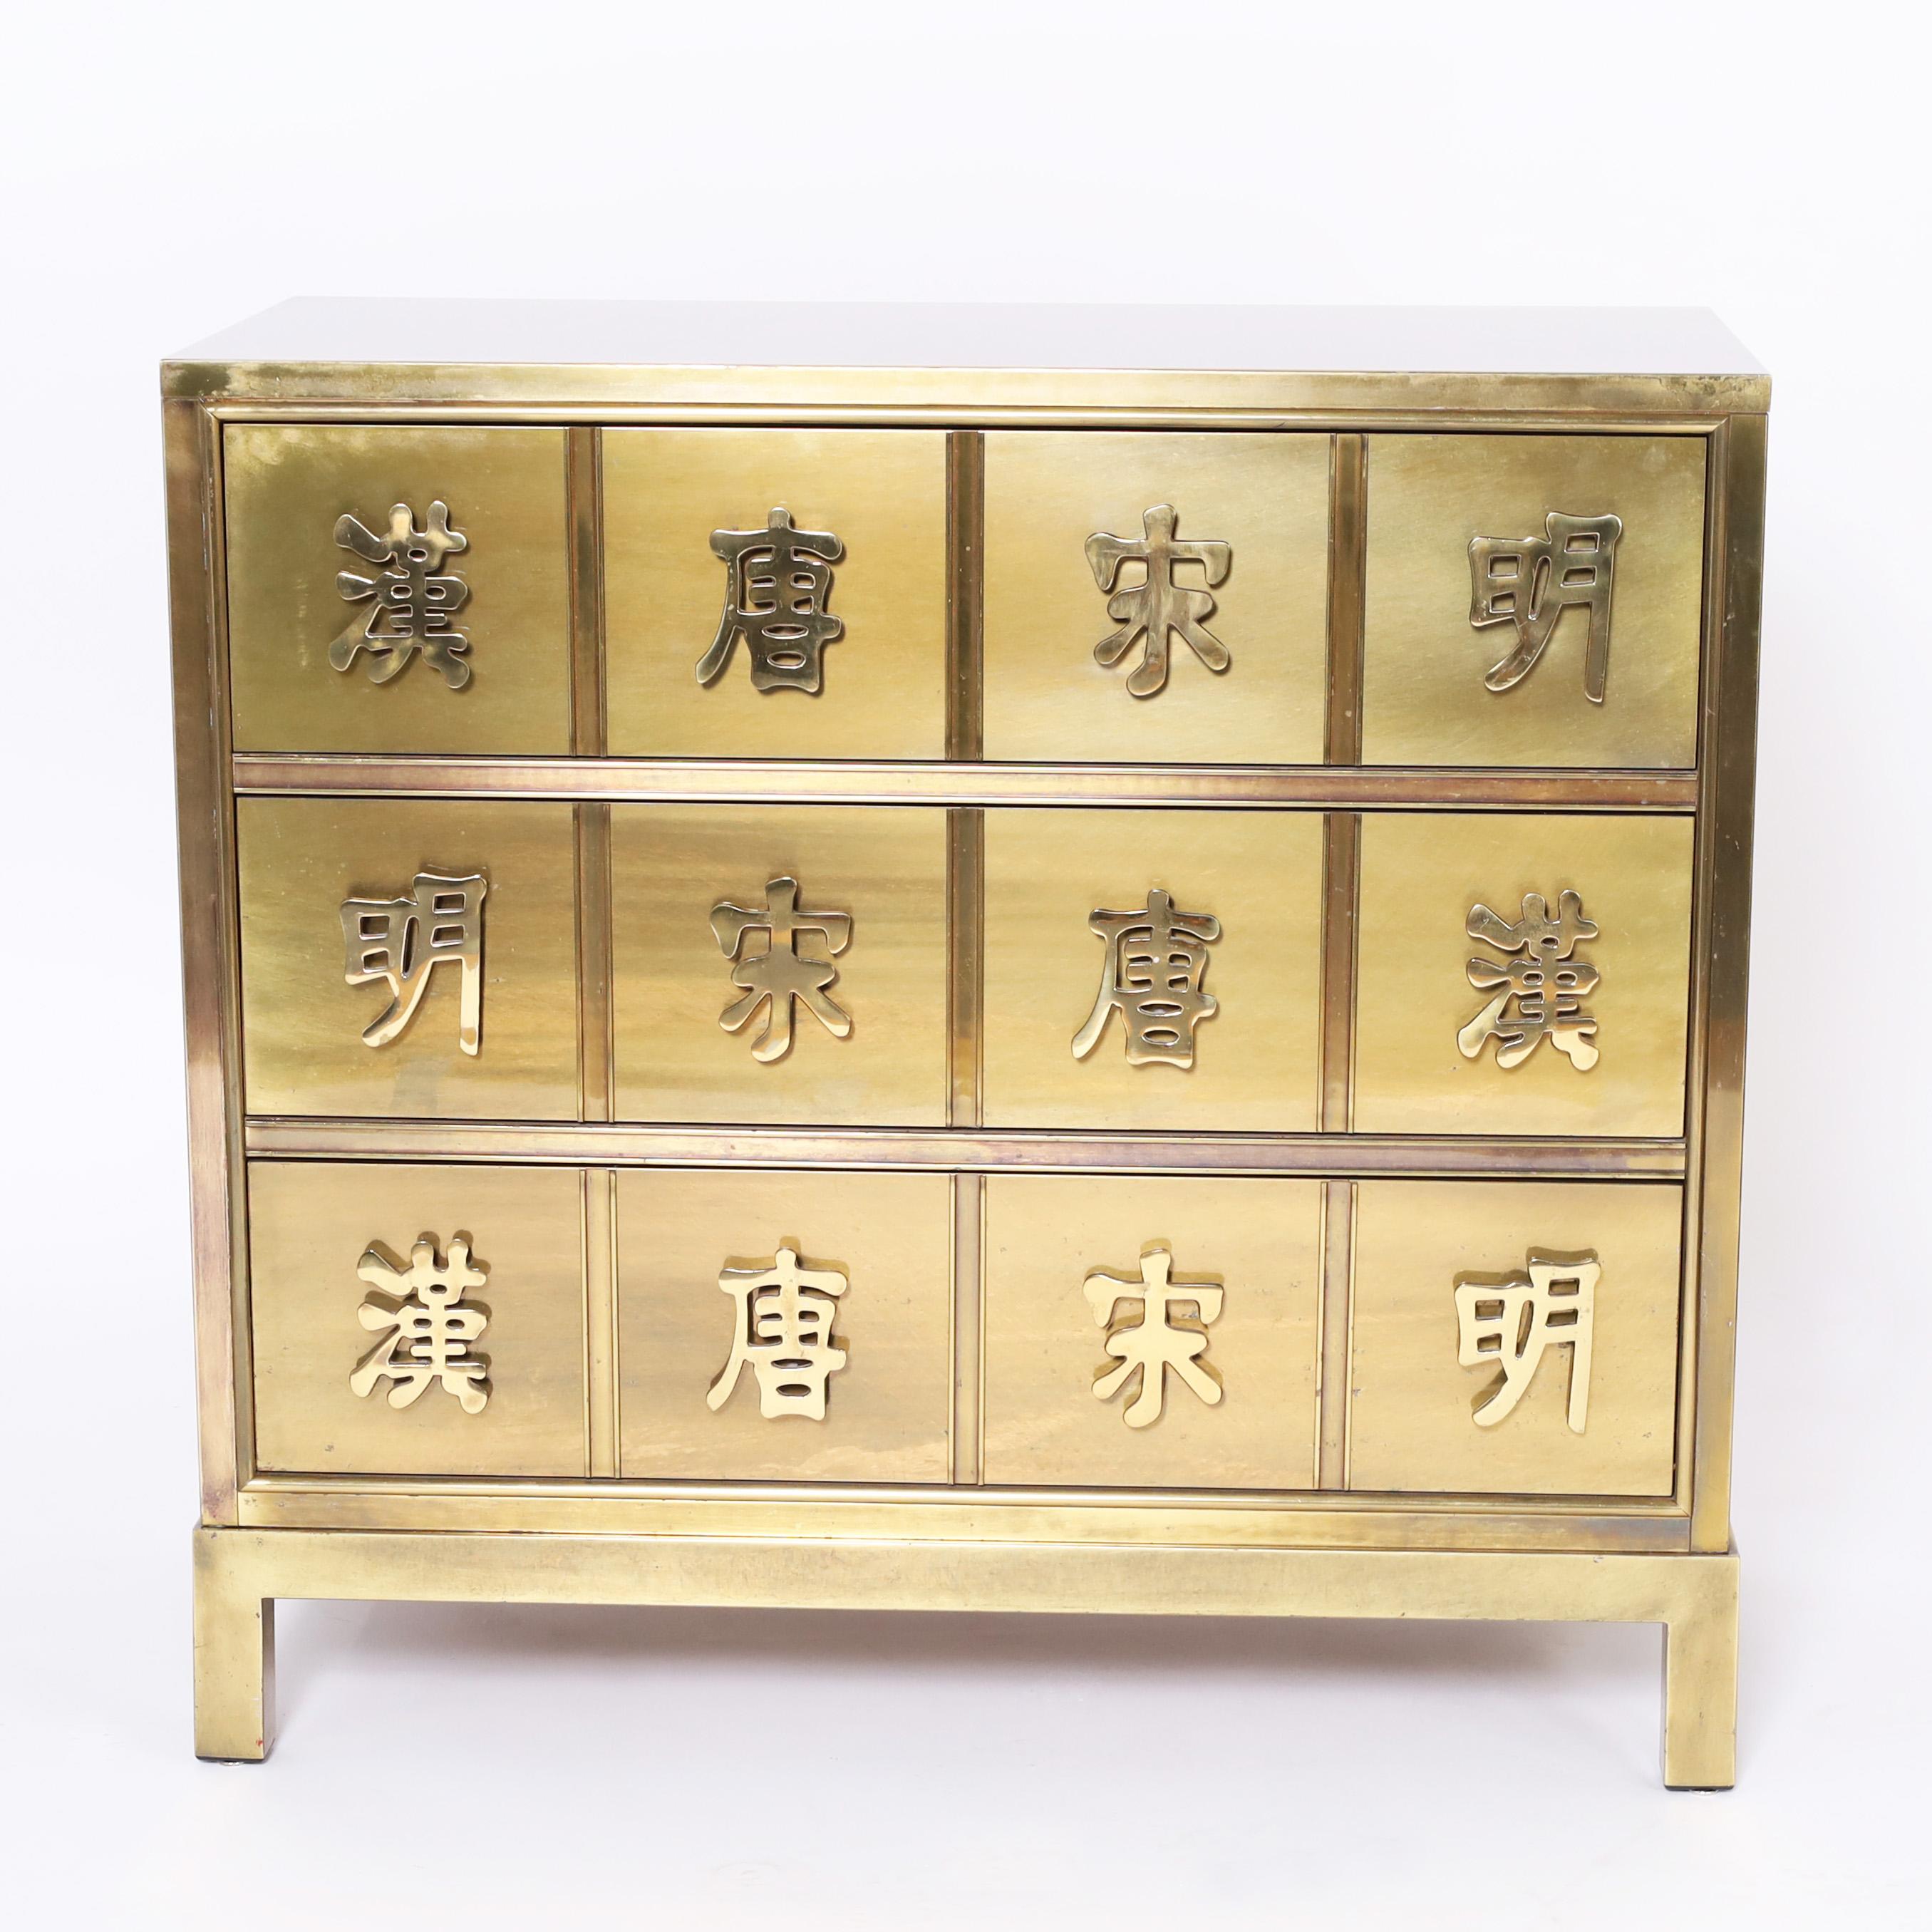 Chic mid century chest of three drawers crafted in a sleek modern form entirely clad in brass with a hip acid washed finish featuring Chinese characters as drawer pulls signifying the four dynasties. 